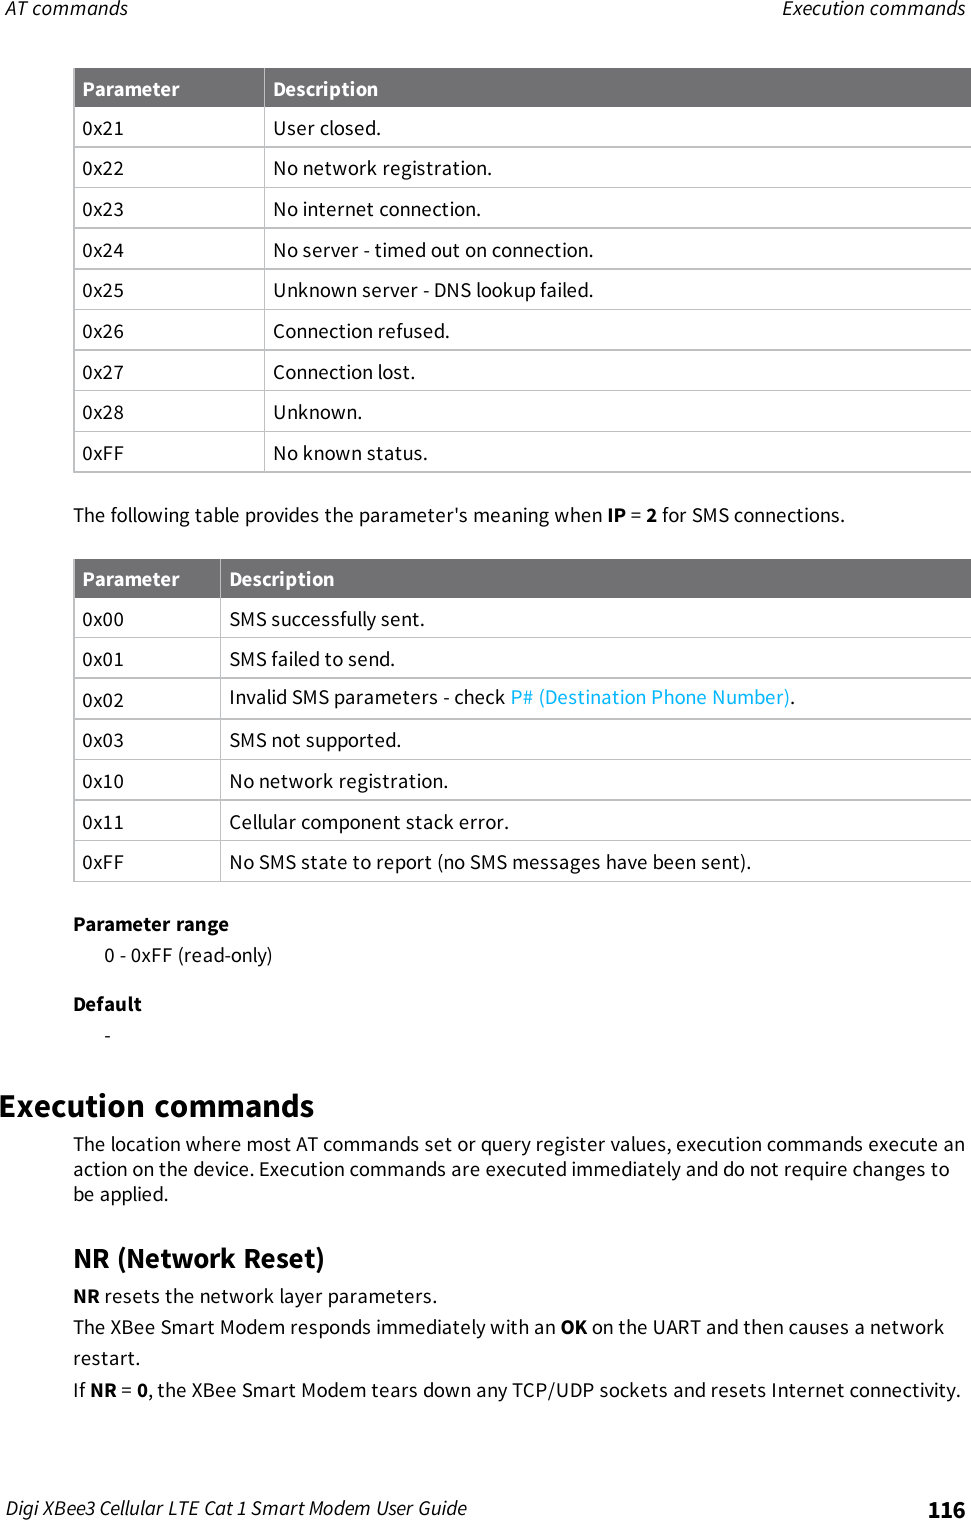 AT commands Execution commandsDigi XBee3 Cellular LTE Cat 1 Smart Modem User Guide 116Parameter Description0x21 User closed.0x22 No network registration.0x23 No internet connection.0x24 No server - timed out on connection.0x25 Unknown server - DNS lookup failed.0x26 Connection refused.0x27 Connection lost.0x28 Unknown.0xFF No known status.The following table provides the parameter&apos;s meaning when IP =2for SMS connections.Parameter Description0x00 SMS successfully sent.0x01 SMS failed to send.0x02 Invalid SMS parameters - check P# (Destination Phone Number).0x03 SMS not supported.0x10 No network registration.0x11 Cellular component stack error.0xFF No SMS state to report (no SMS messages have been sent).Parameter range0 - 0xFF (read-only)Default-Execution commandsThe location where most AT commands set or query register values, execution commands execute anaction on the device. Execution commands are executed immediately and do not require changes tobe applied.NR (Network Reset)NR resets the network layer parameters.The XBee Smart Modem responds immediately with an OK on the UART and then causes a networkrestart.If NR =0, the XBee Smart Modem tears down any TCP/UDP sockets and resets Internet connectivity.